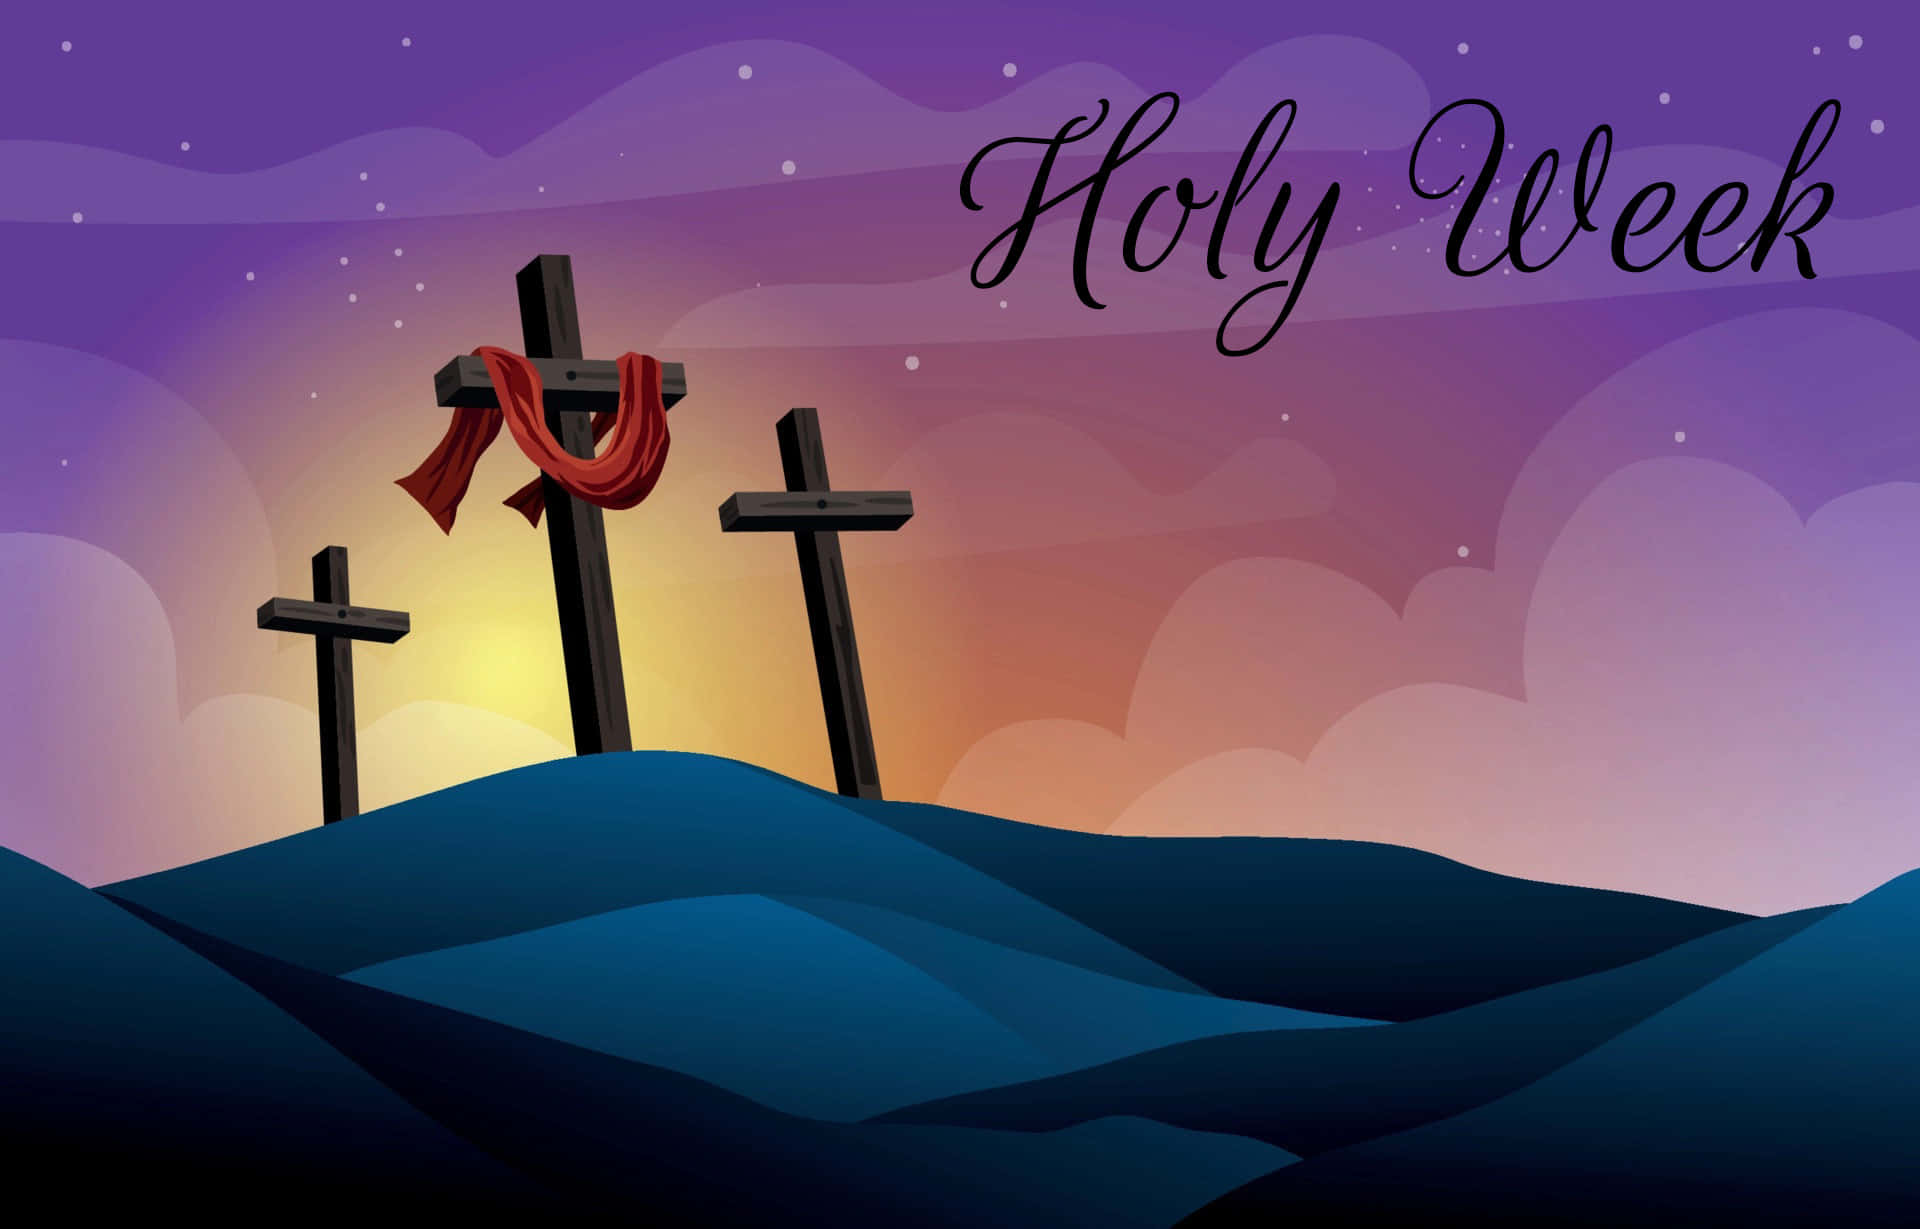 Download Holy Week With Crosses And A Red Cross Wallpaper